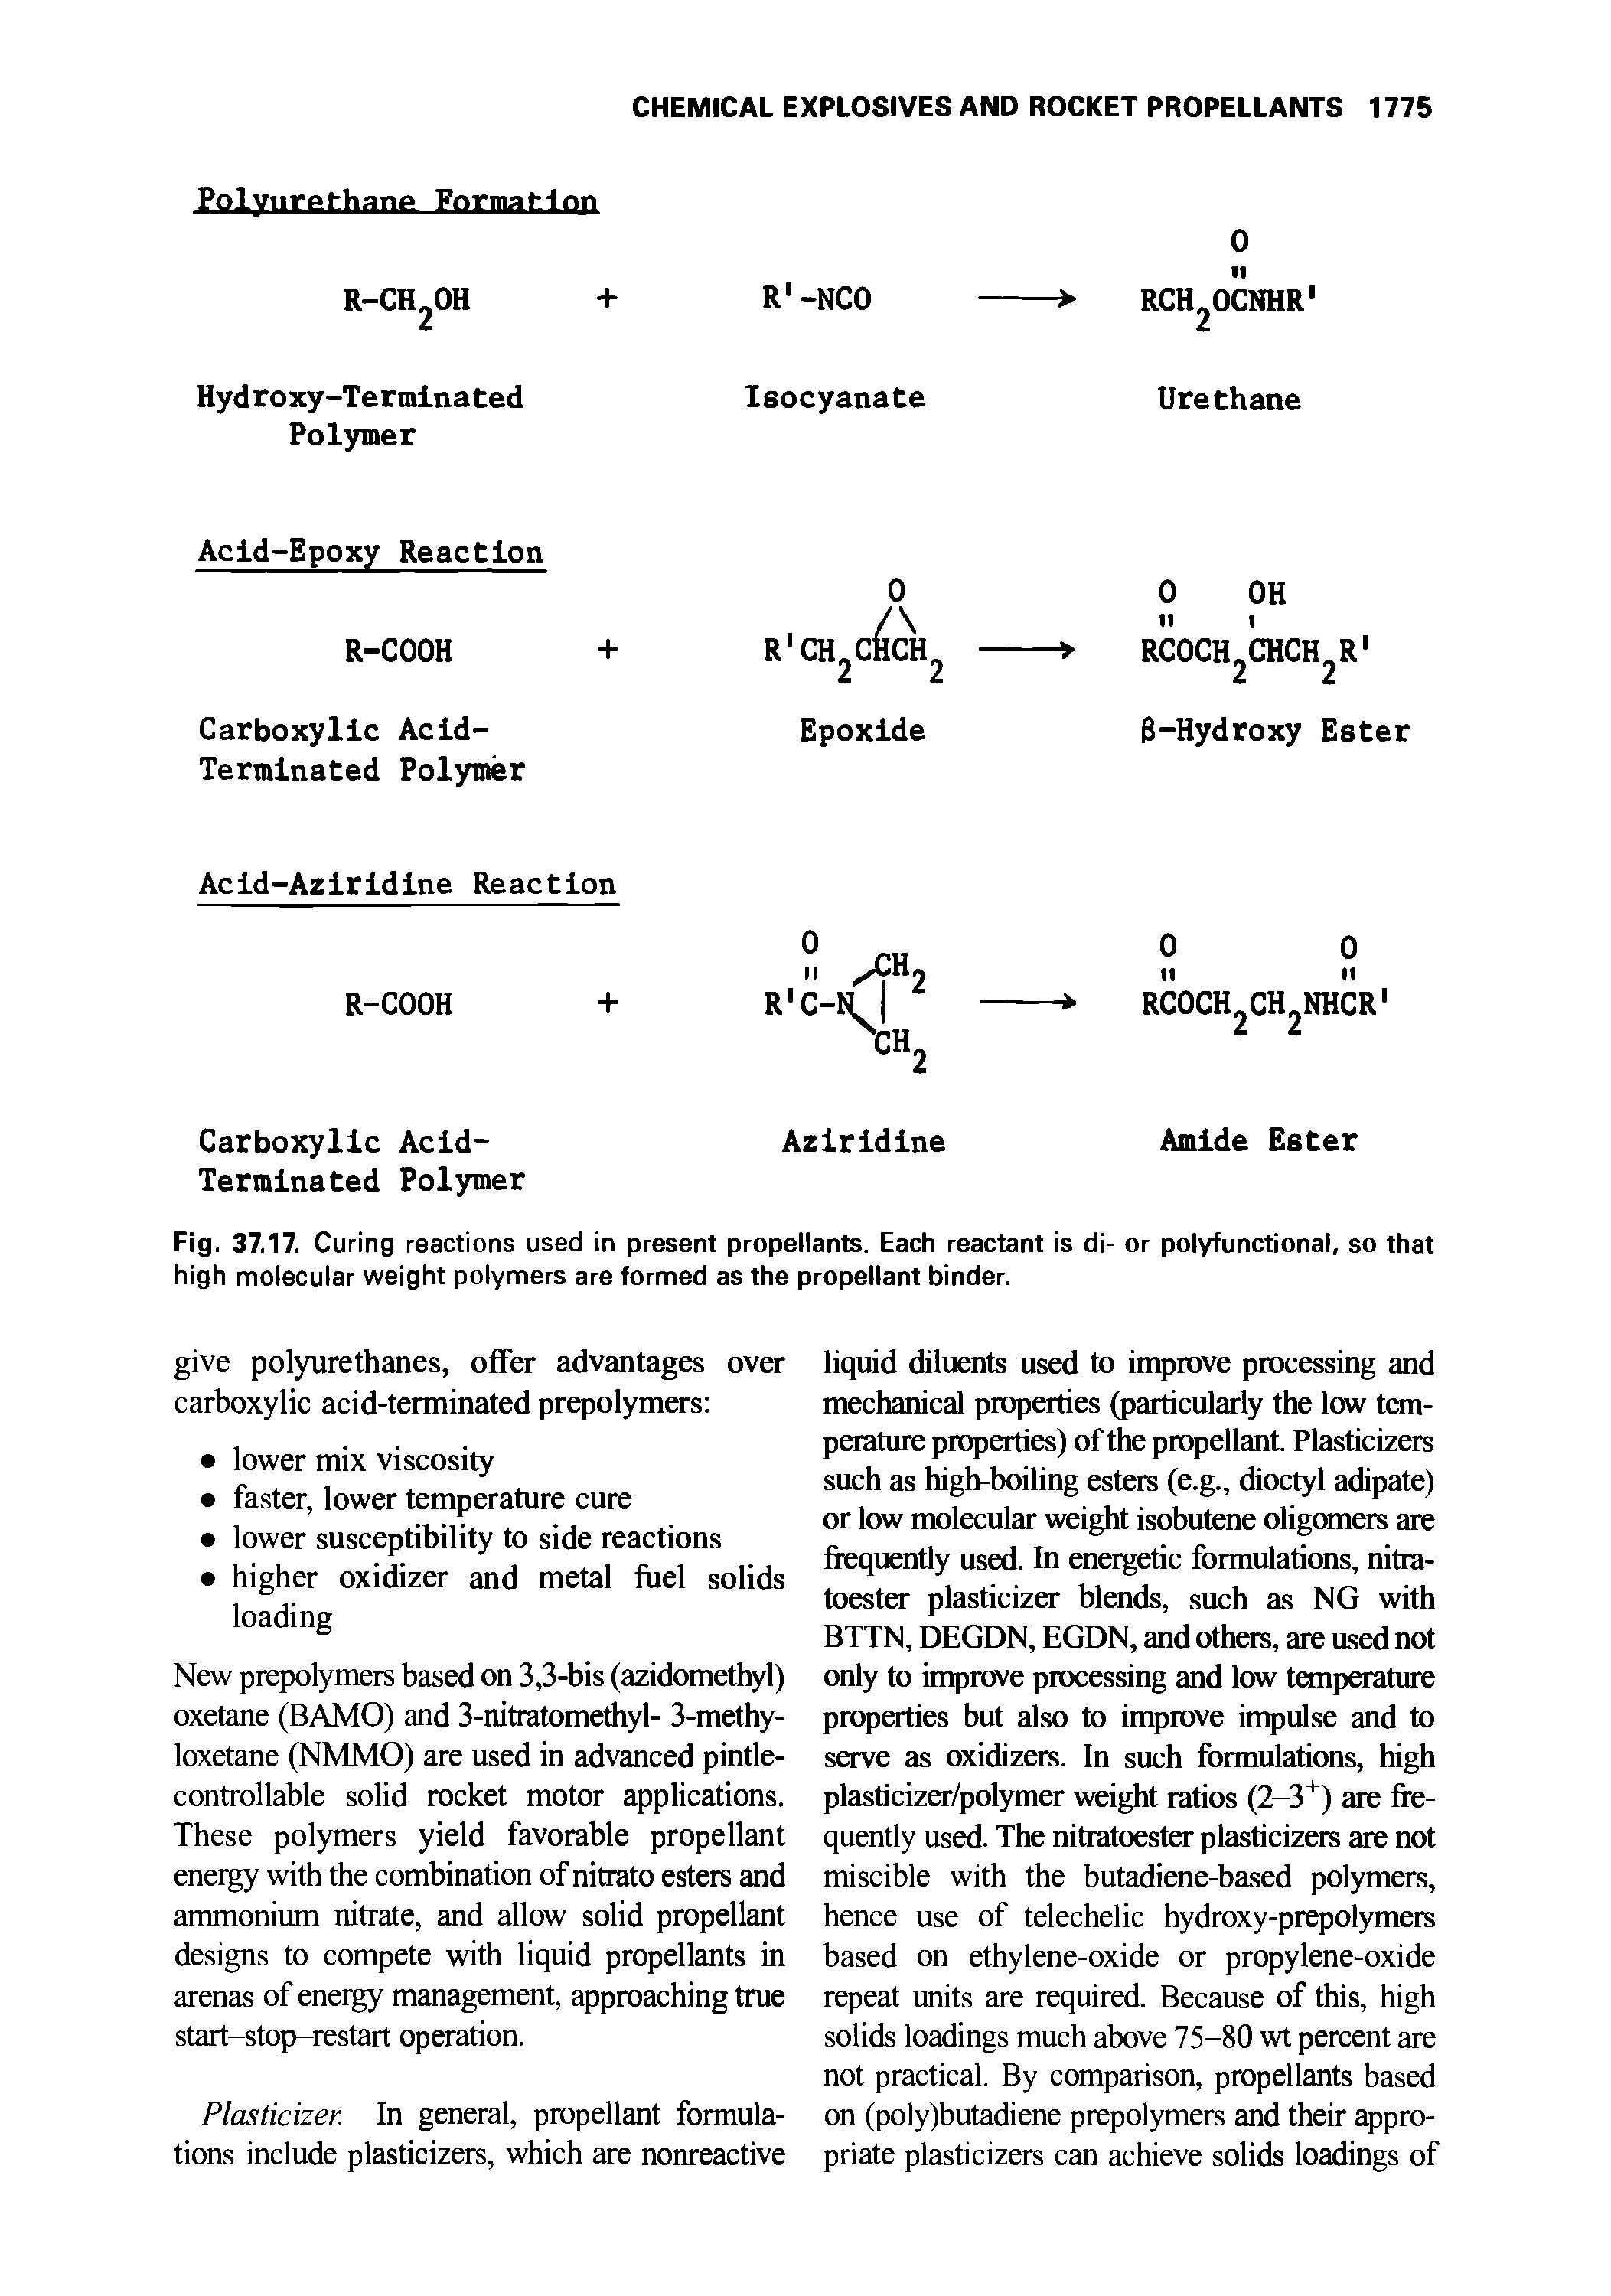 Fig. 37.17. Curing reactions used in present propellants. Each reactant is di- or polyfunctional, so that high molecular weight polymers are formed as the propellant binder.